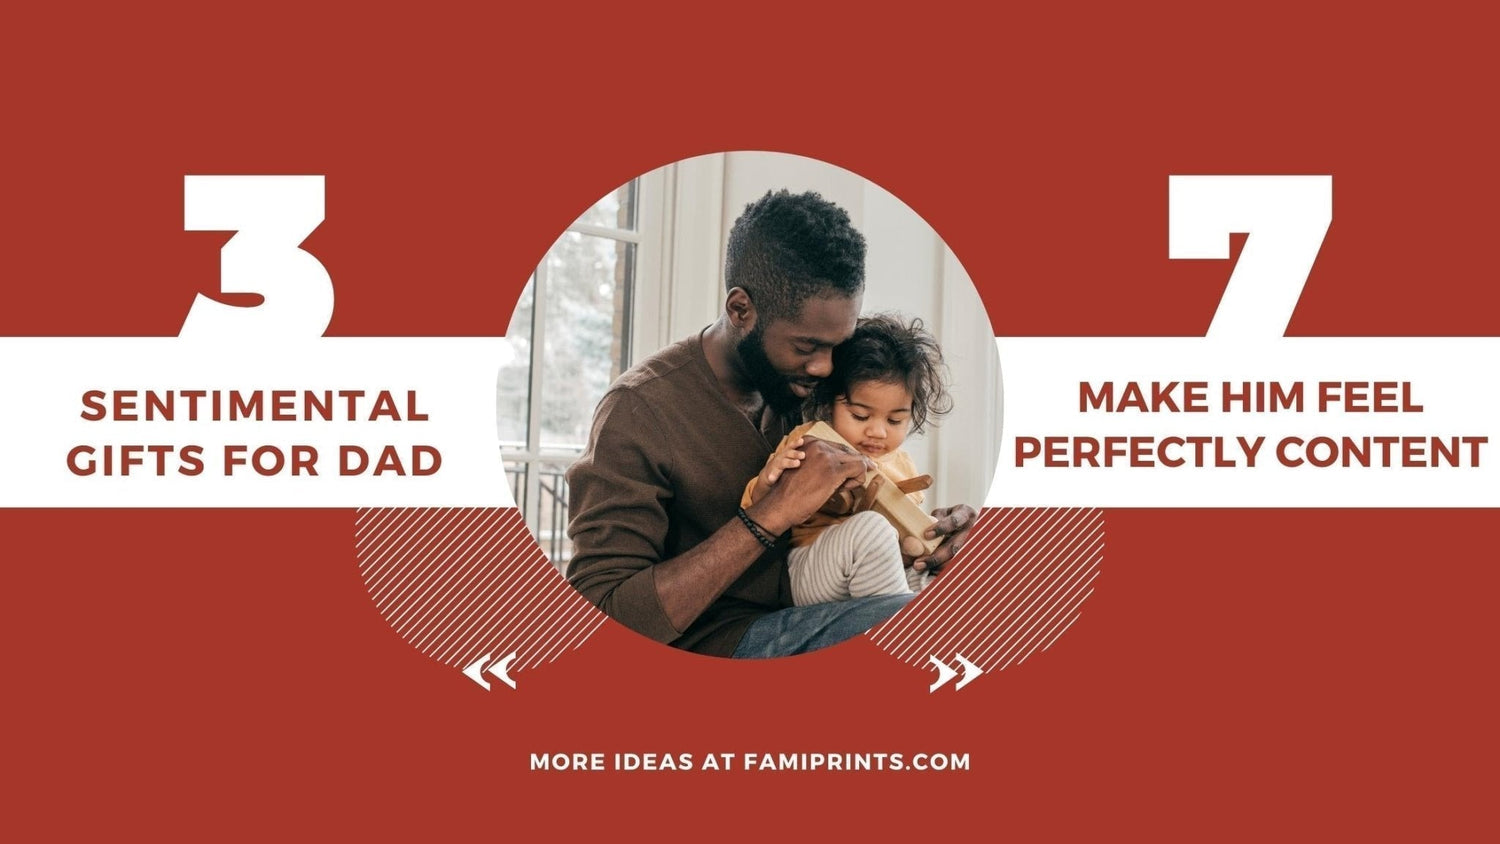 37+ Sentimental Gifts For Dad To Make Him Feel Perfectly Content - FamiPrints | Trending Customizable Family Gifts